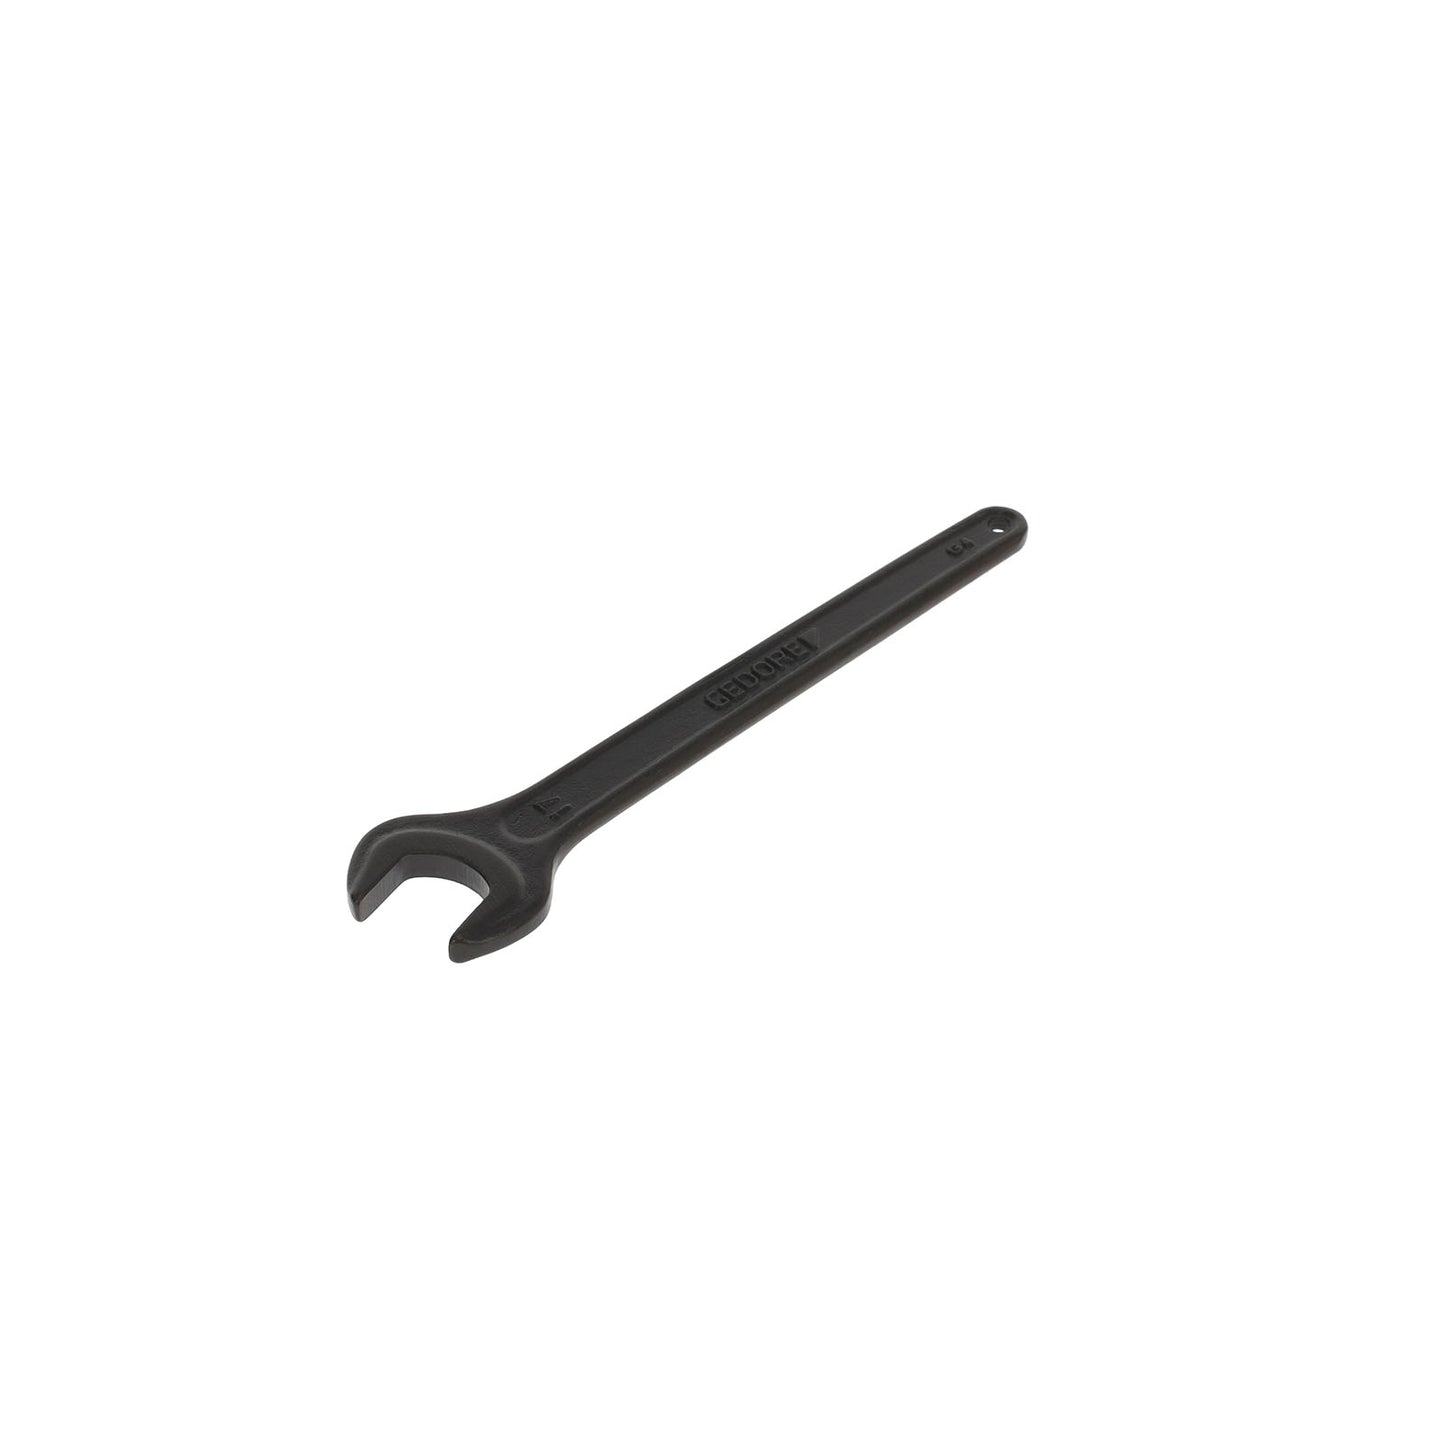 GEDORE 894 17 - 1 Open End Wrench, 17mm (6574840)